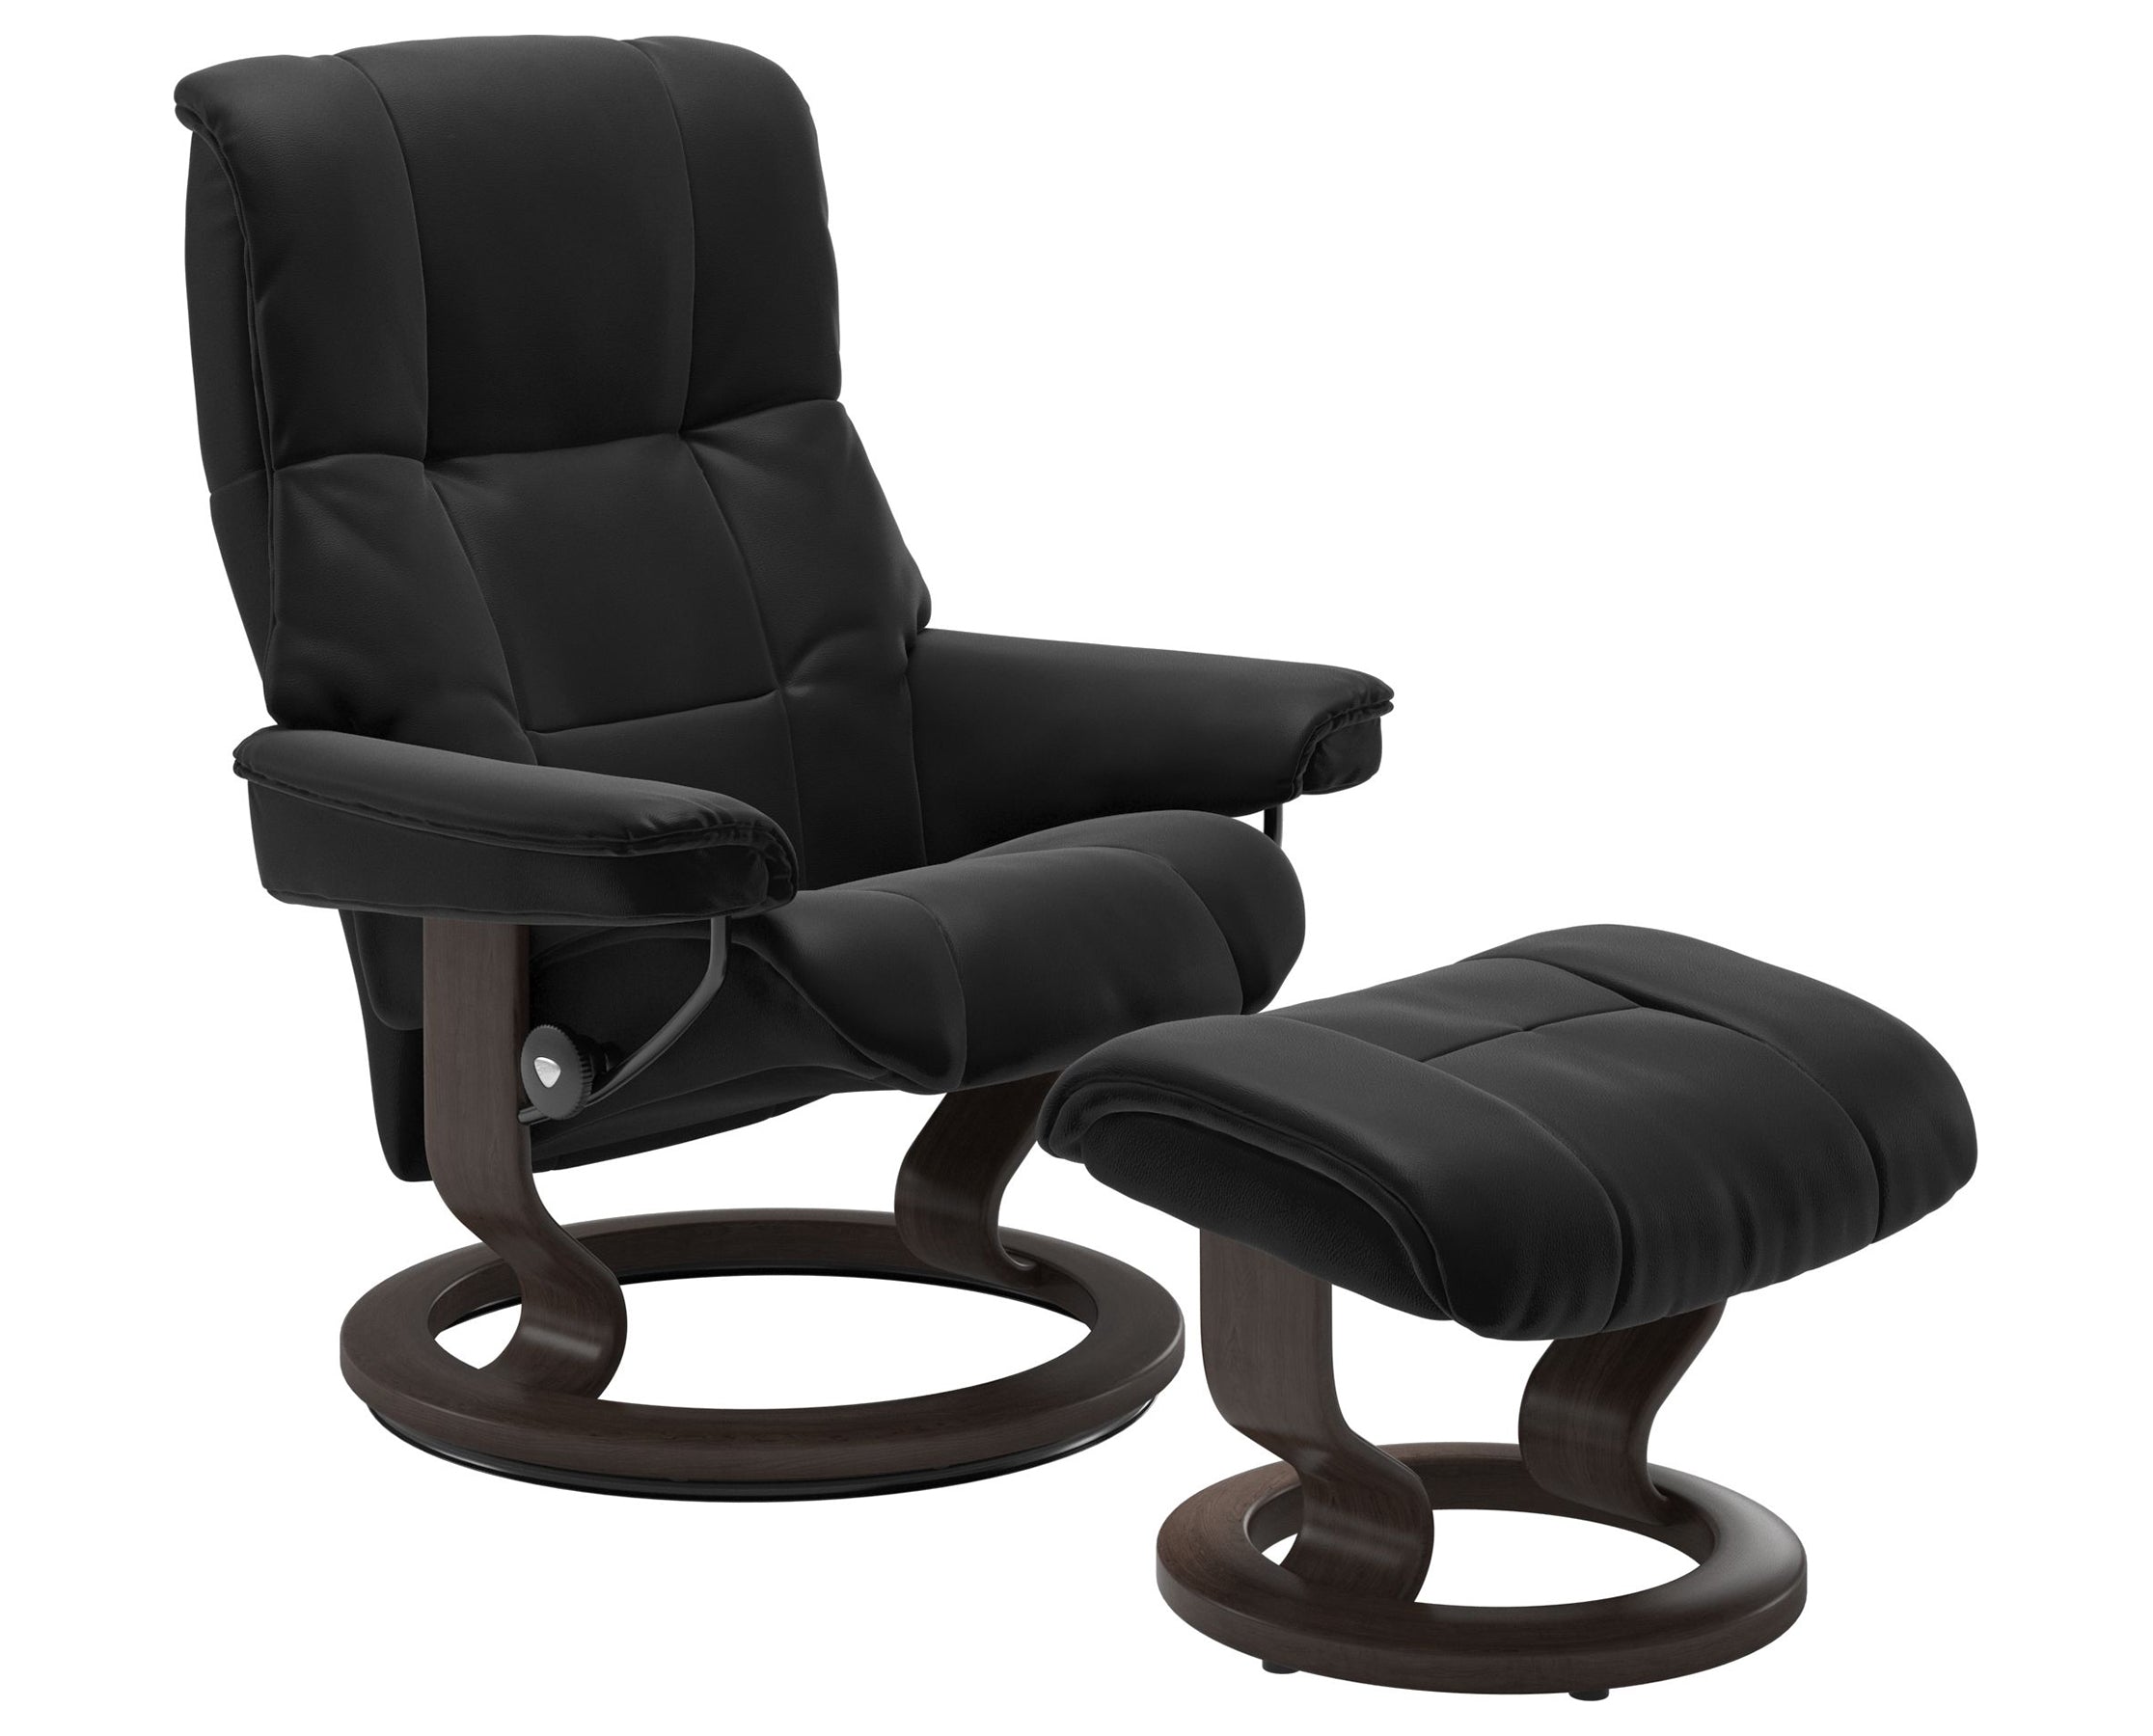 Paloma Leather Black S/M/L and Wenge Base | Stressless Mayfair Classic Recliner | Valley Ridge Furniture